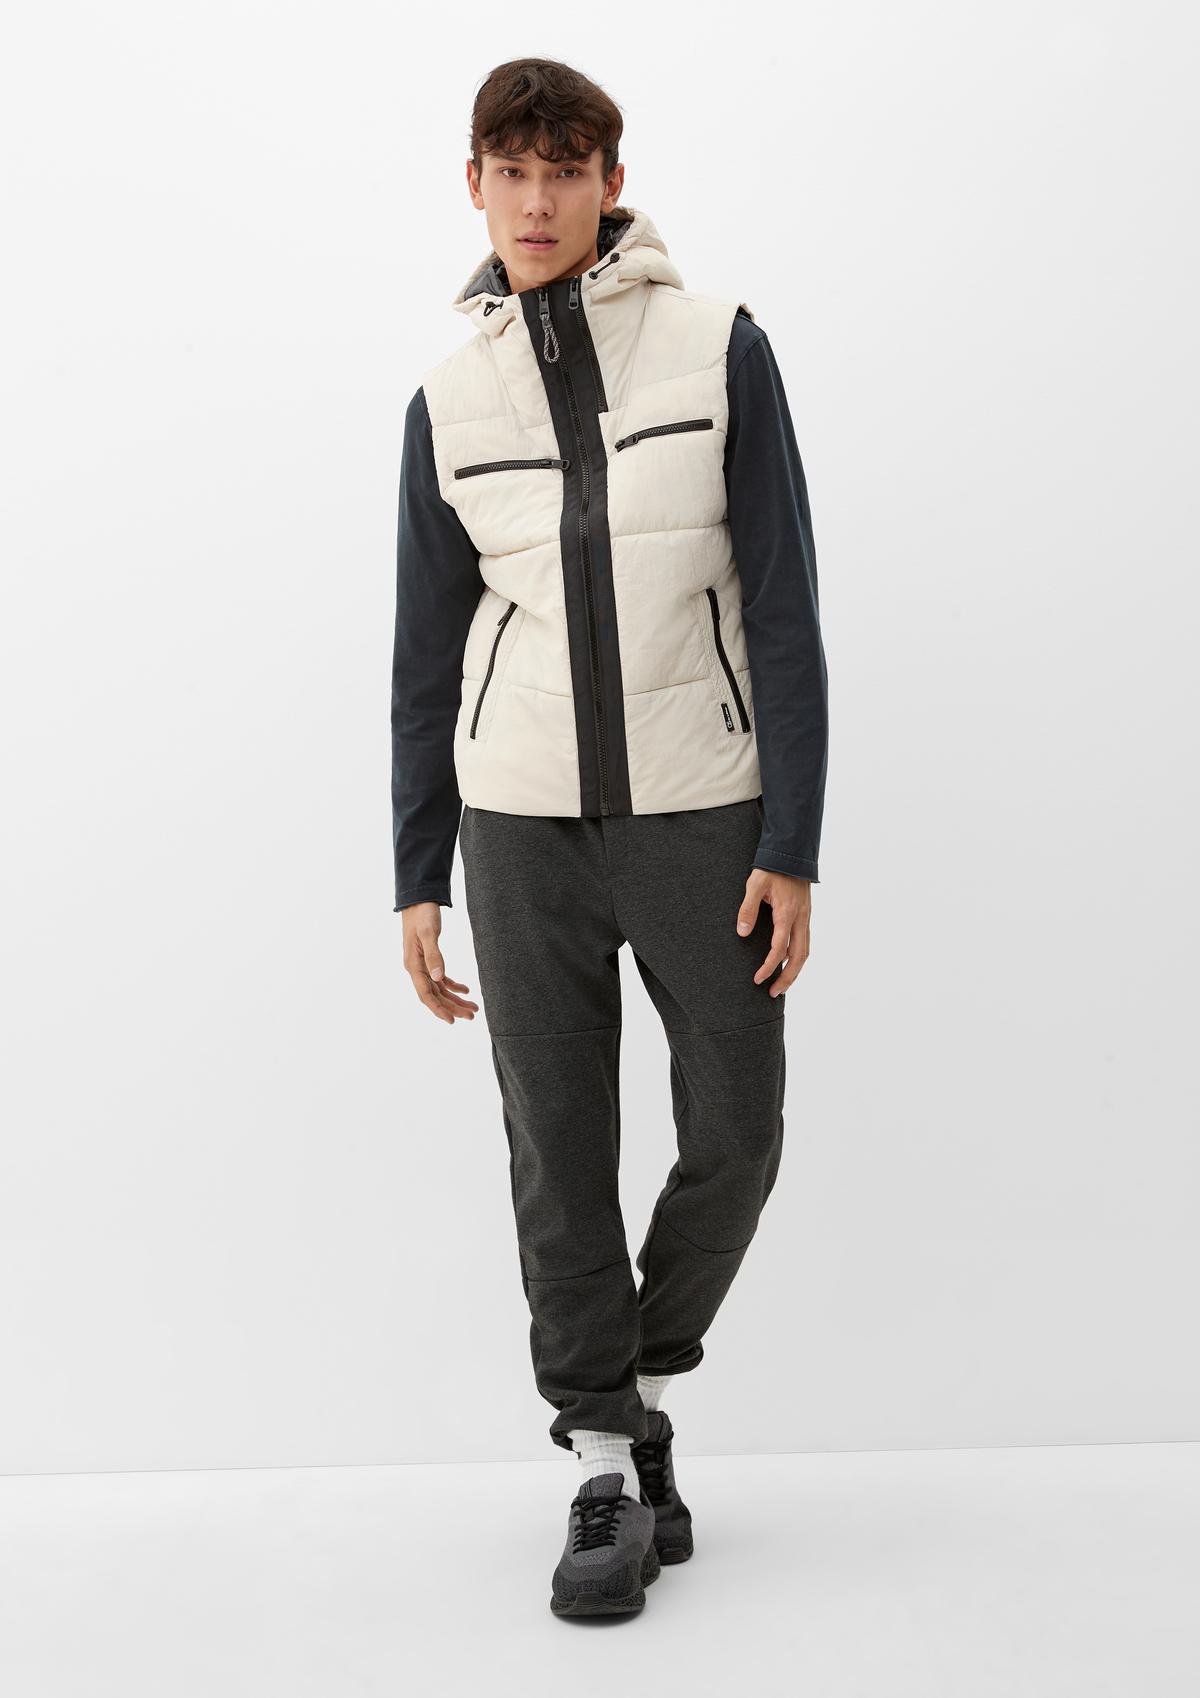 s.Oliver Body warmer with a quilted pattern